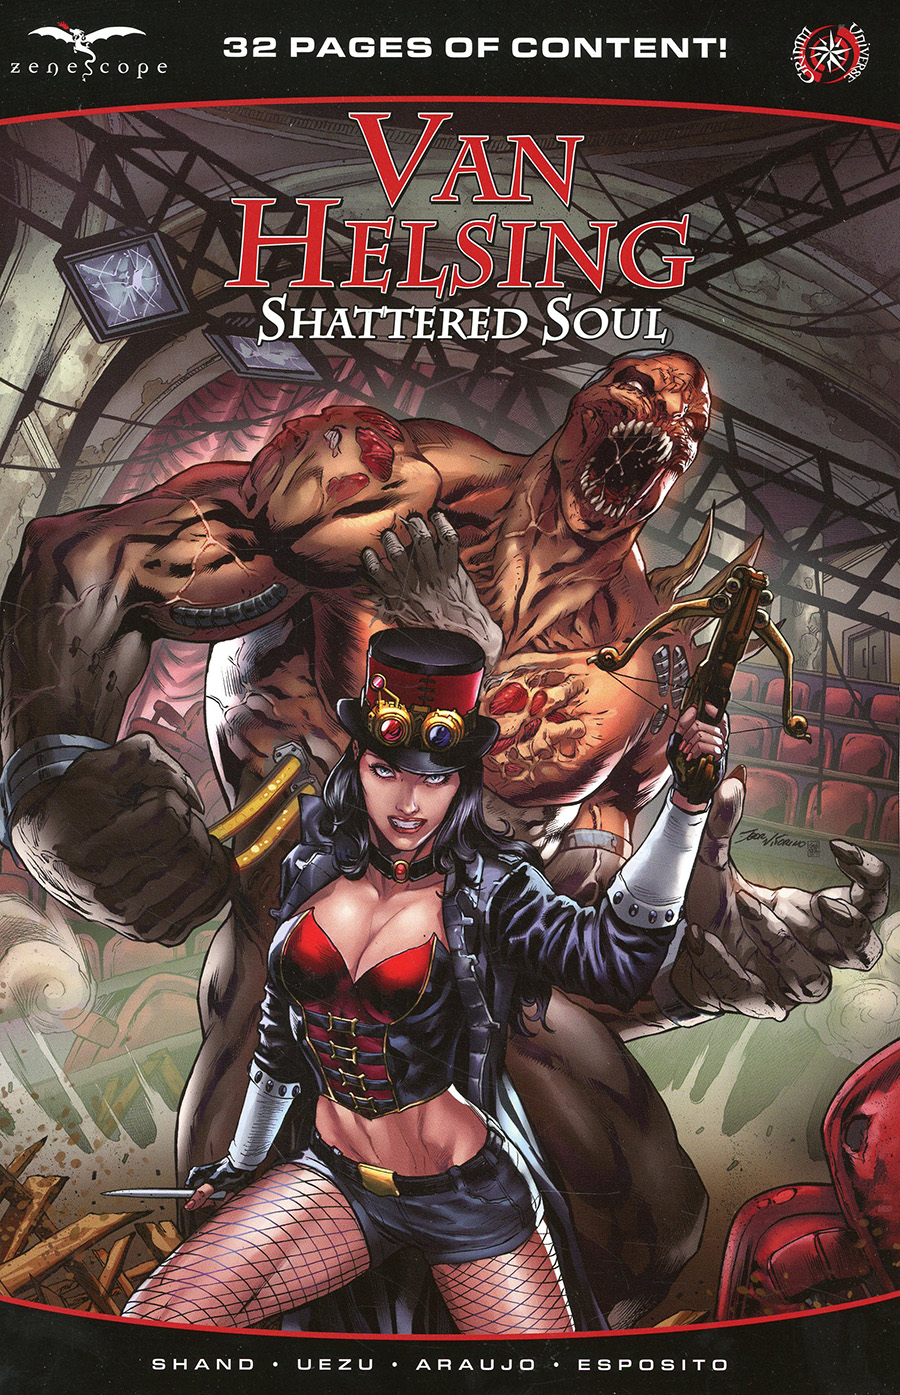 Grimm Fairy Tales Presents Van Helsing Shattered Soul #1 (One Shot) Cover A Igor Vitorino